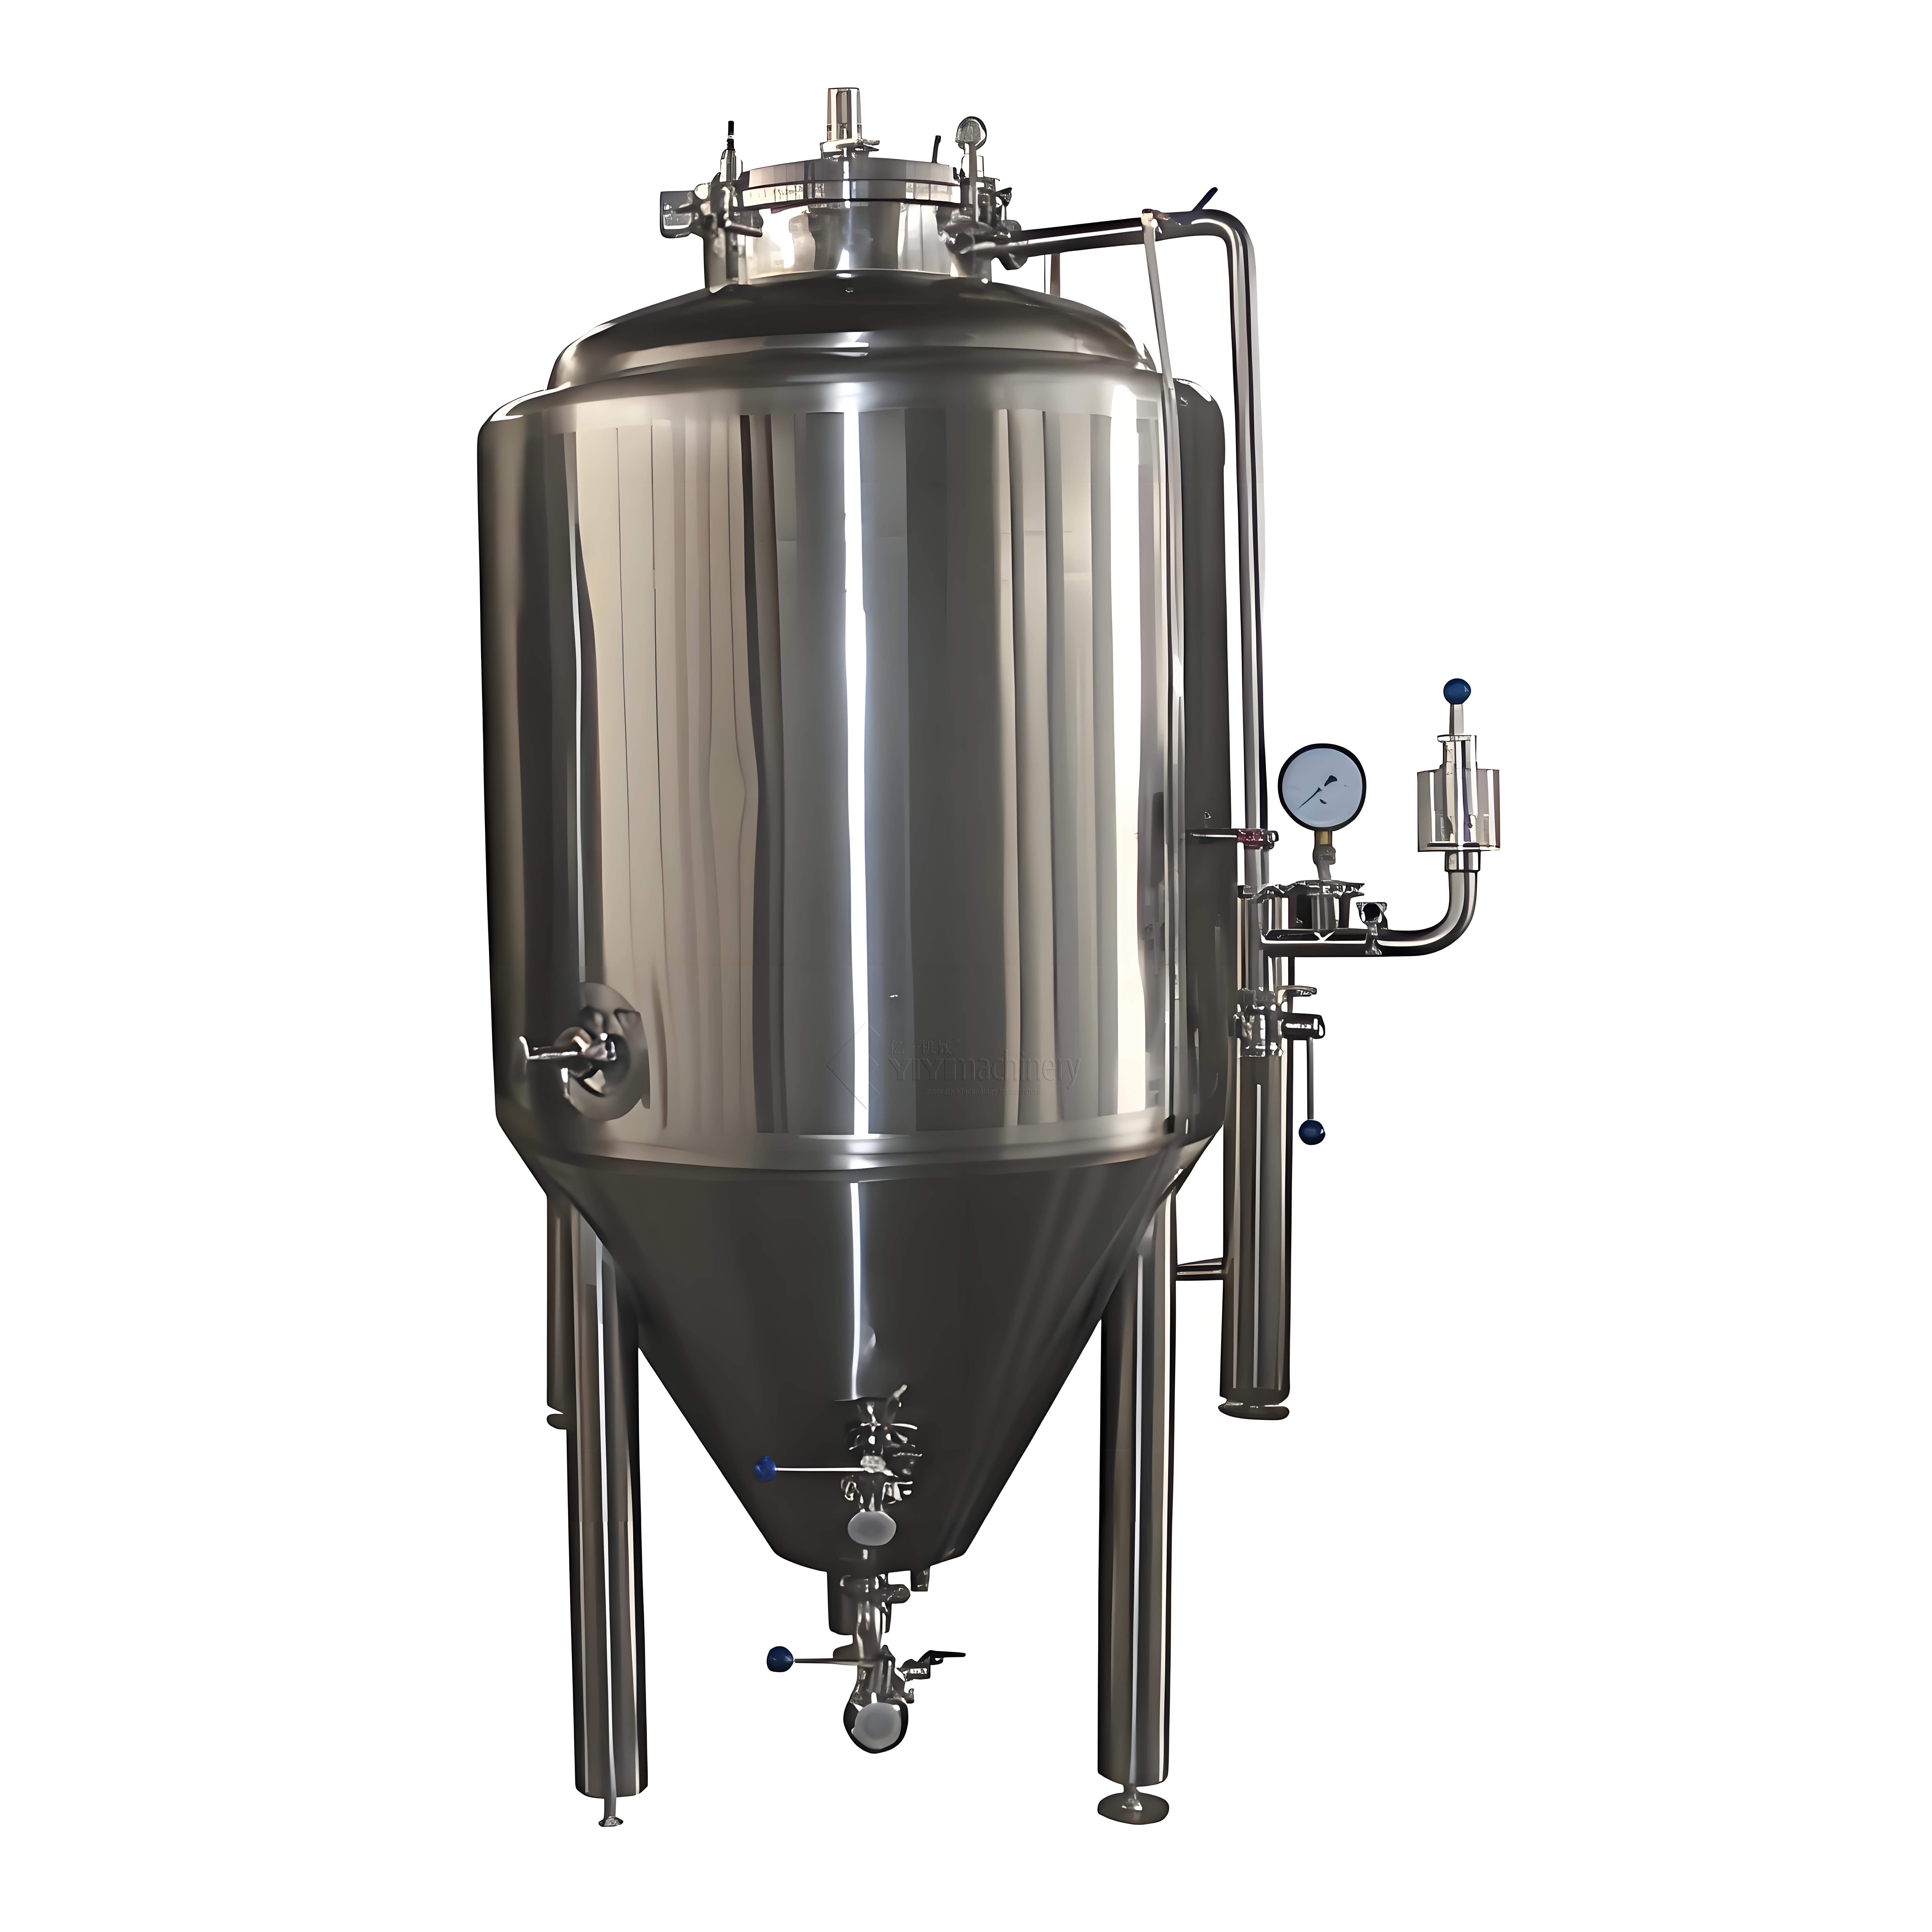 Stainless Steel Tank Isobaric Fermenting Equipment Beer Fermentation Tanks for Sale with Cooling Jacket 500L 1000L 3000L